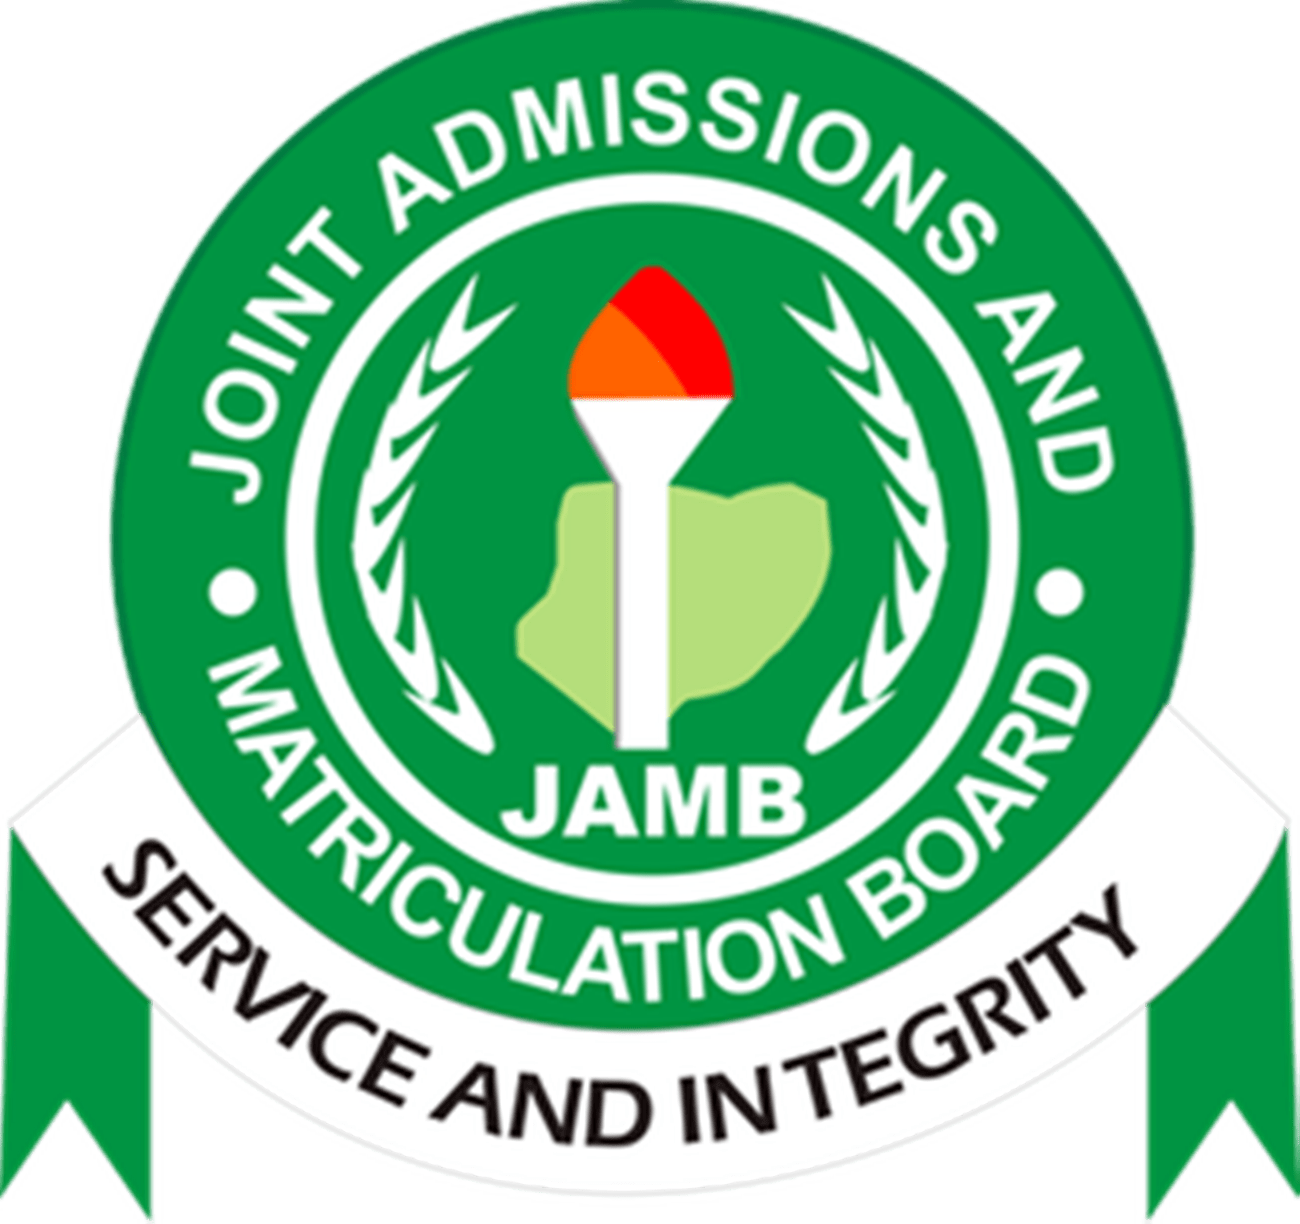 Some Universities admitted students illegally in 2019 session — JAMB